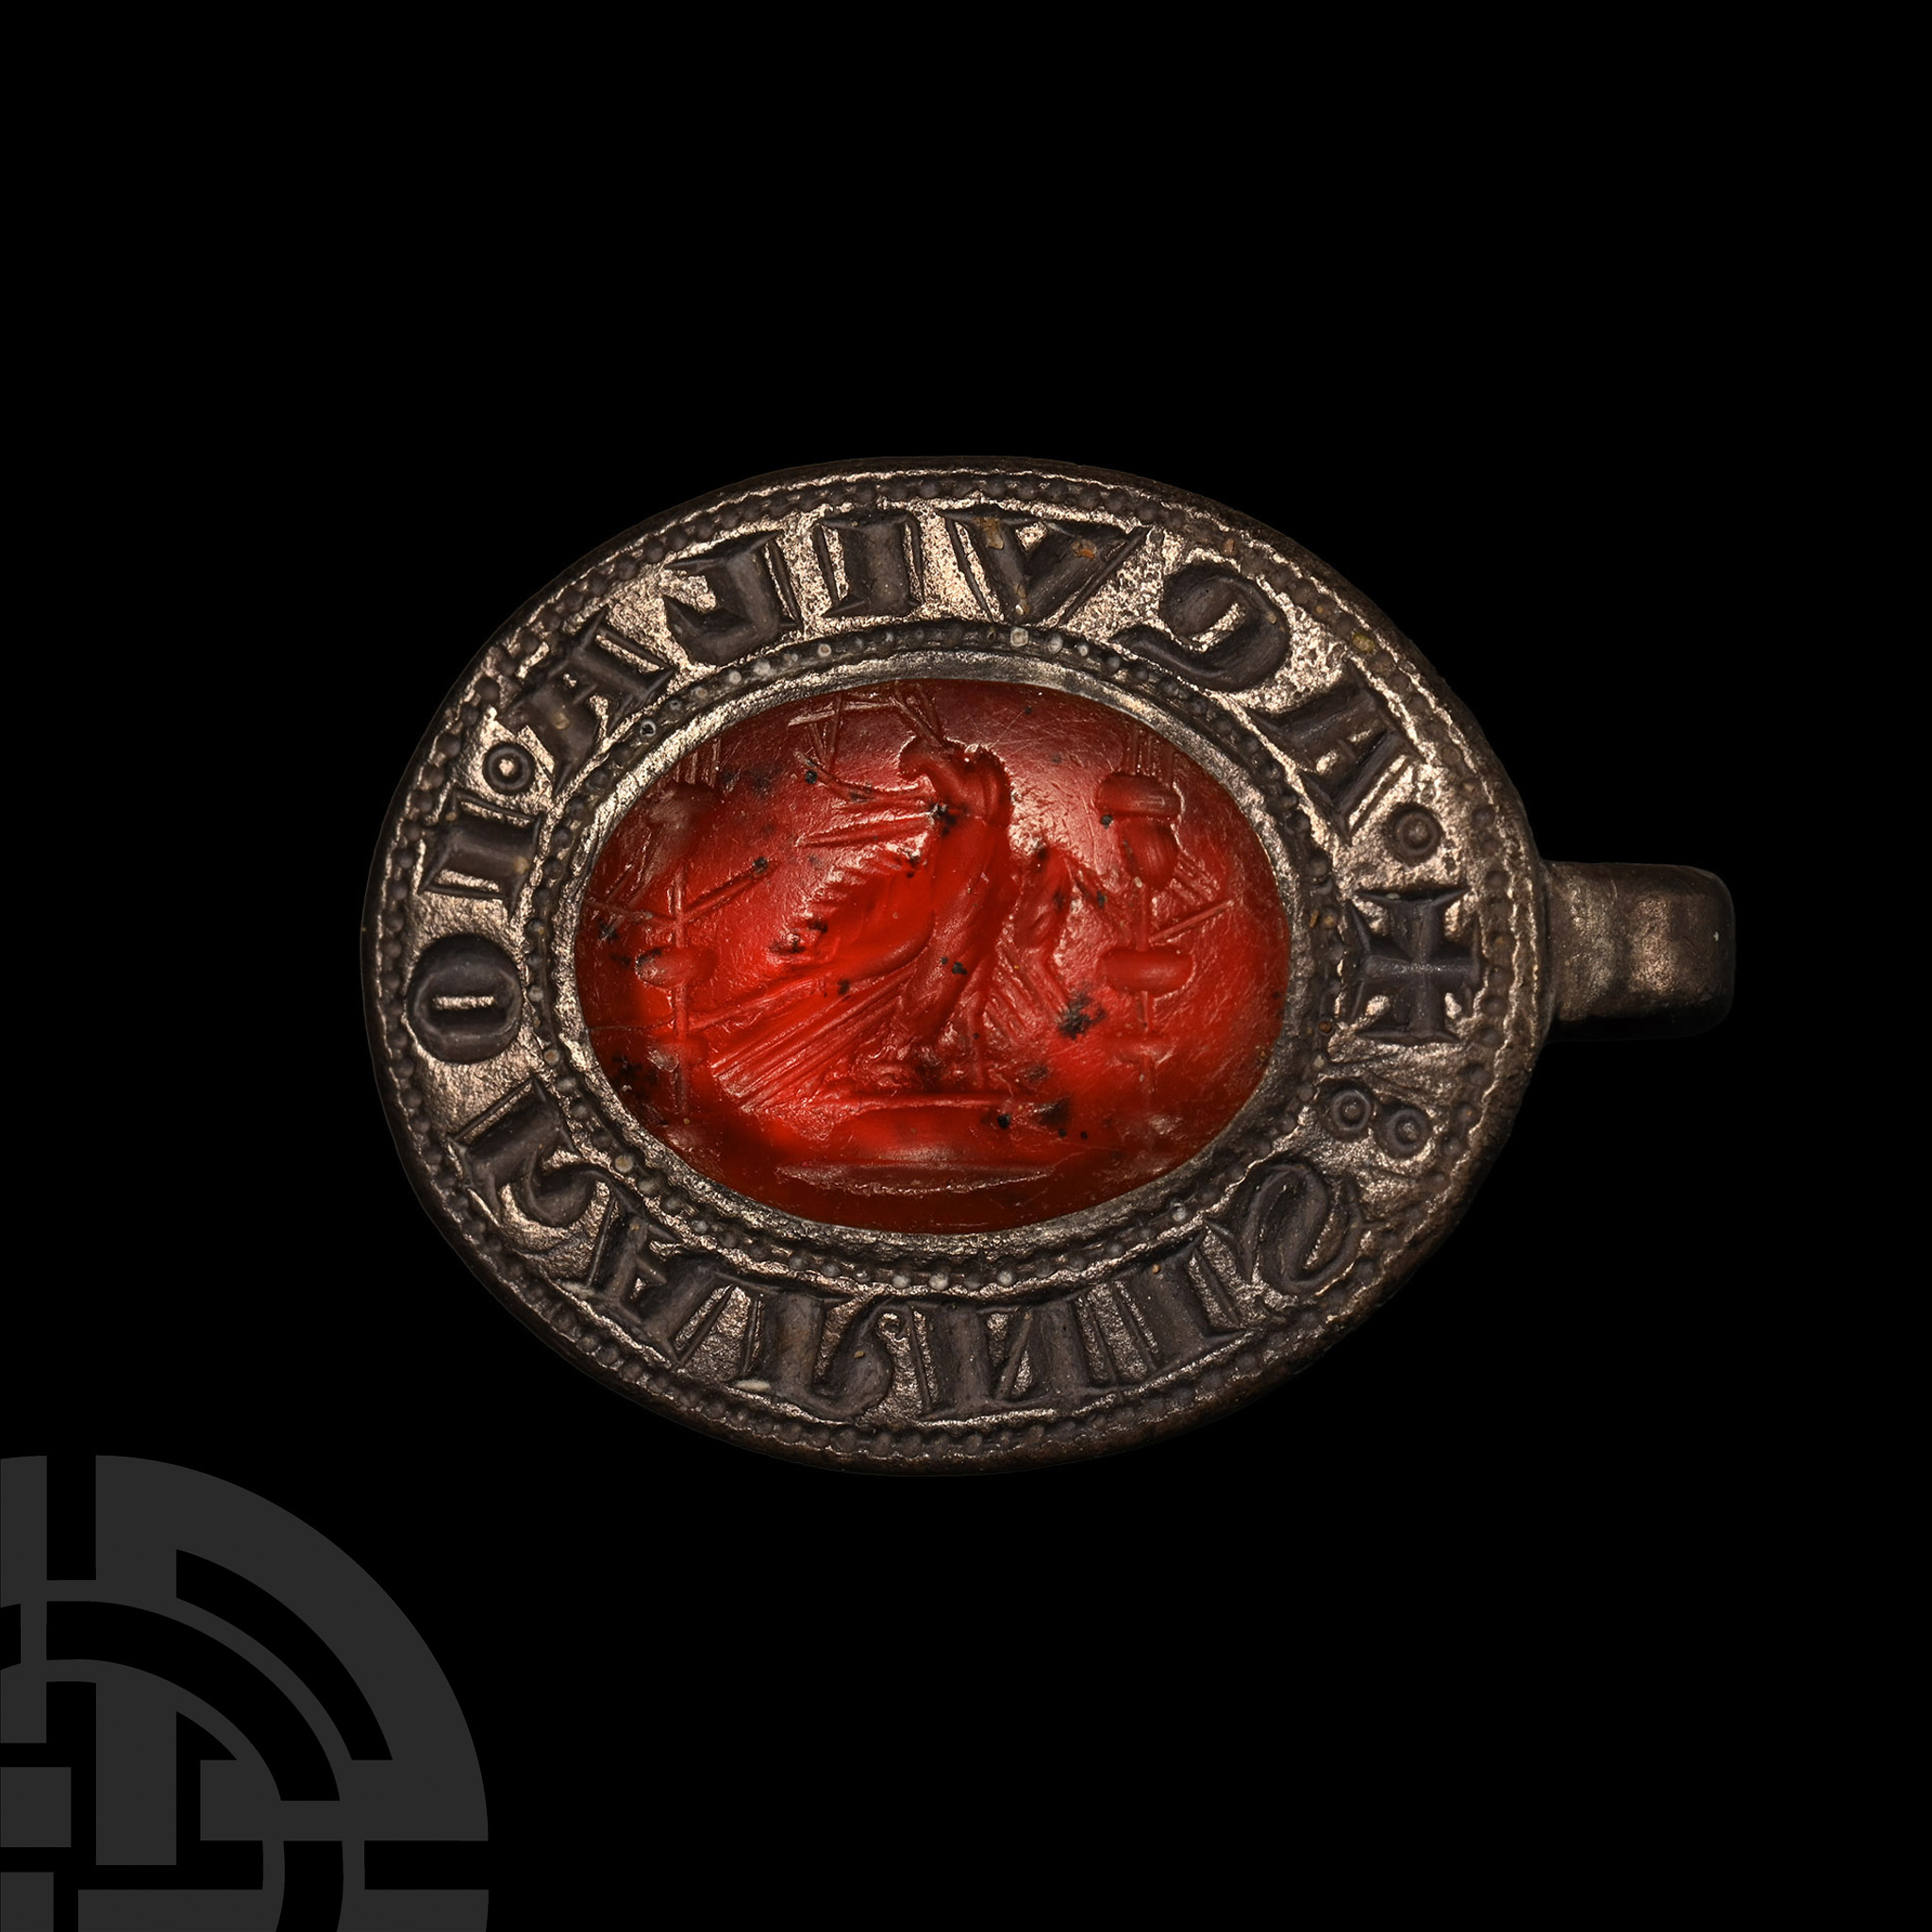 Medieval Silver Seal Matrix for John the Evangelist with Roman Eagle Gemstone - Image 3 of 4